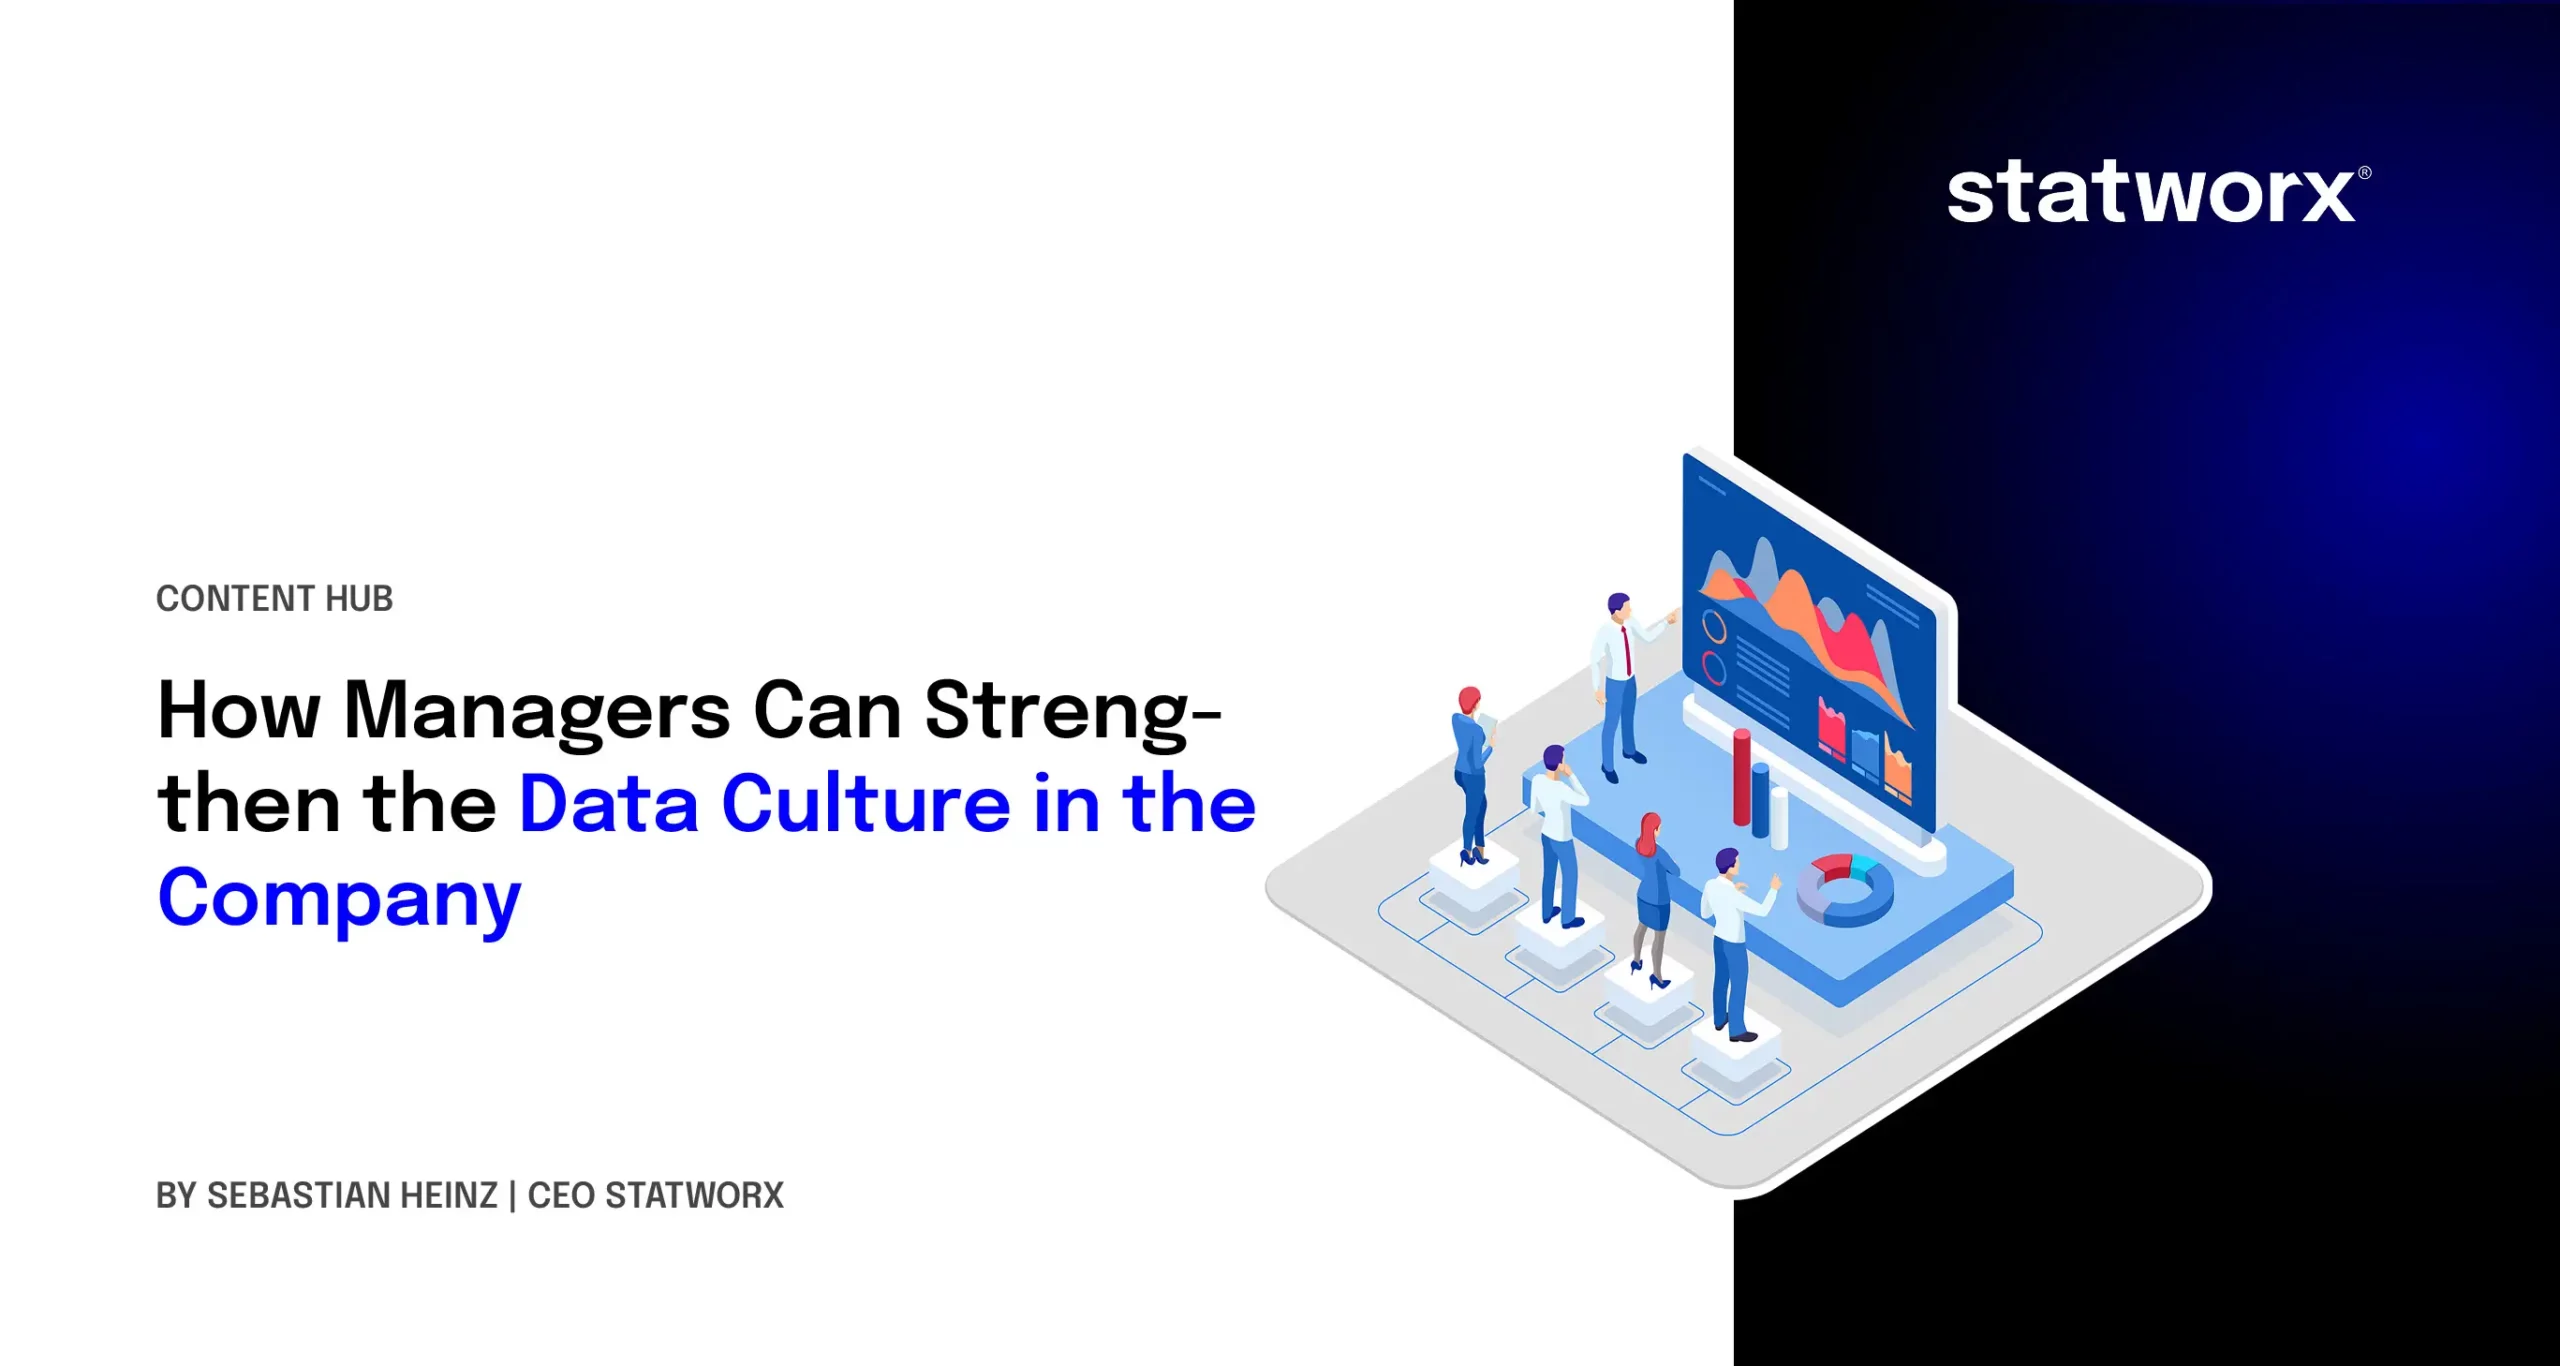 How managers can strengthen the data culture in the company